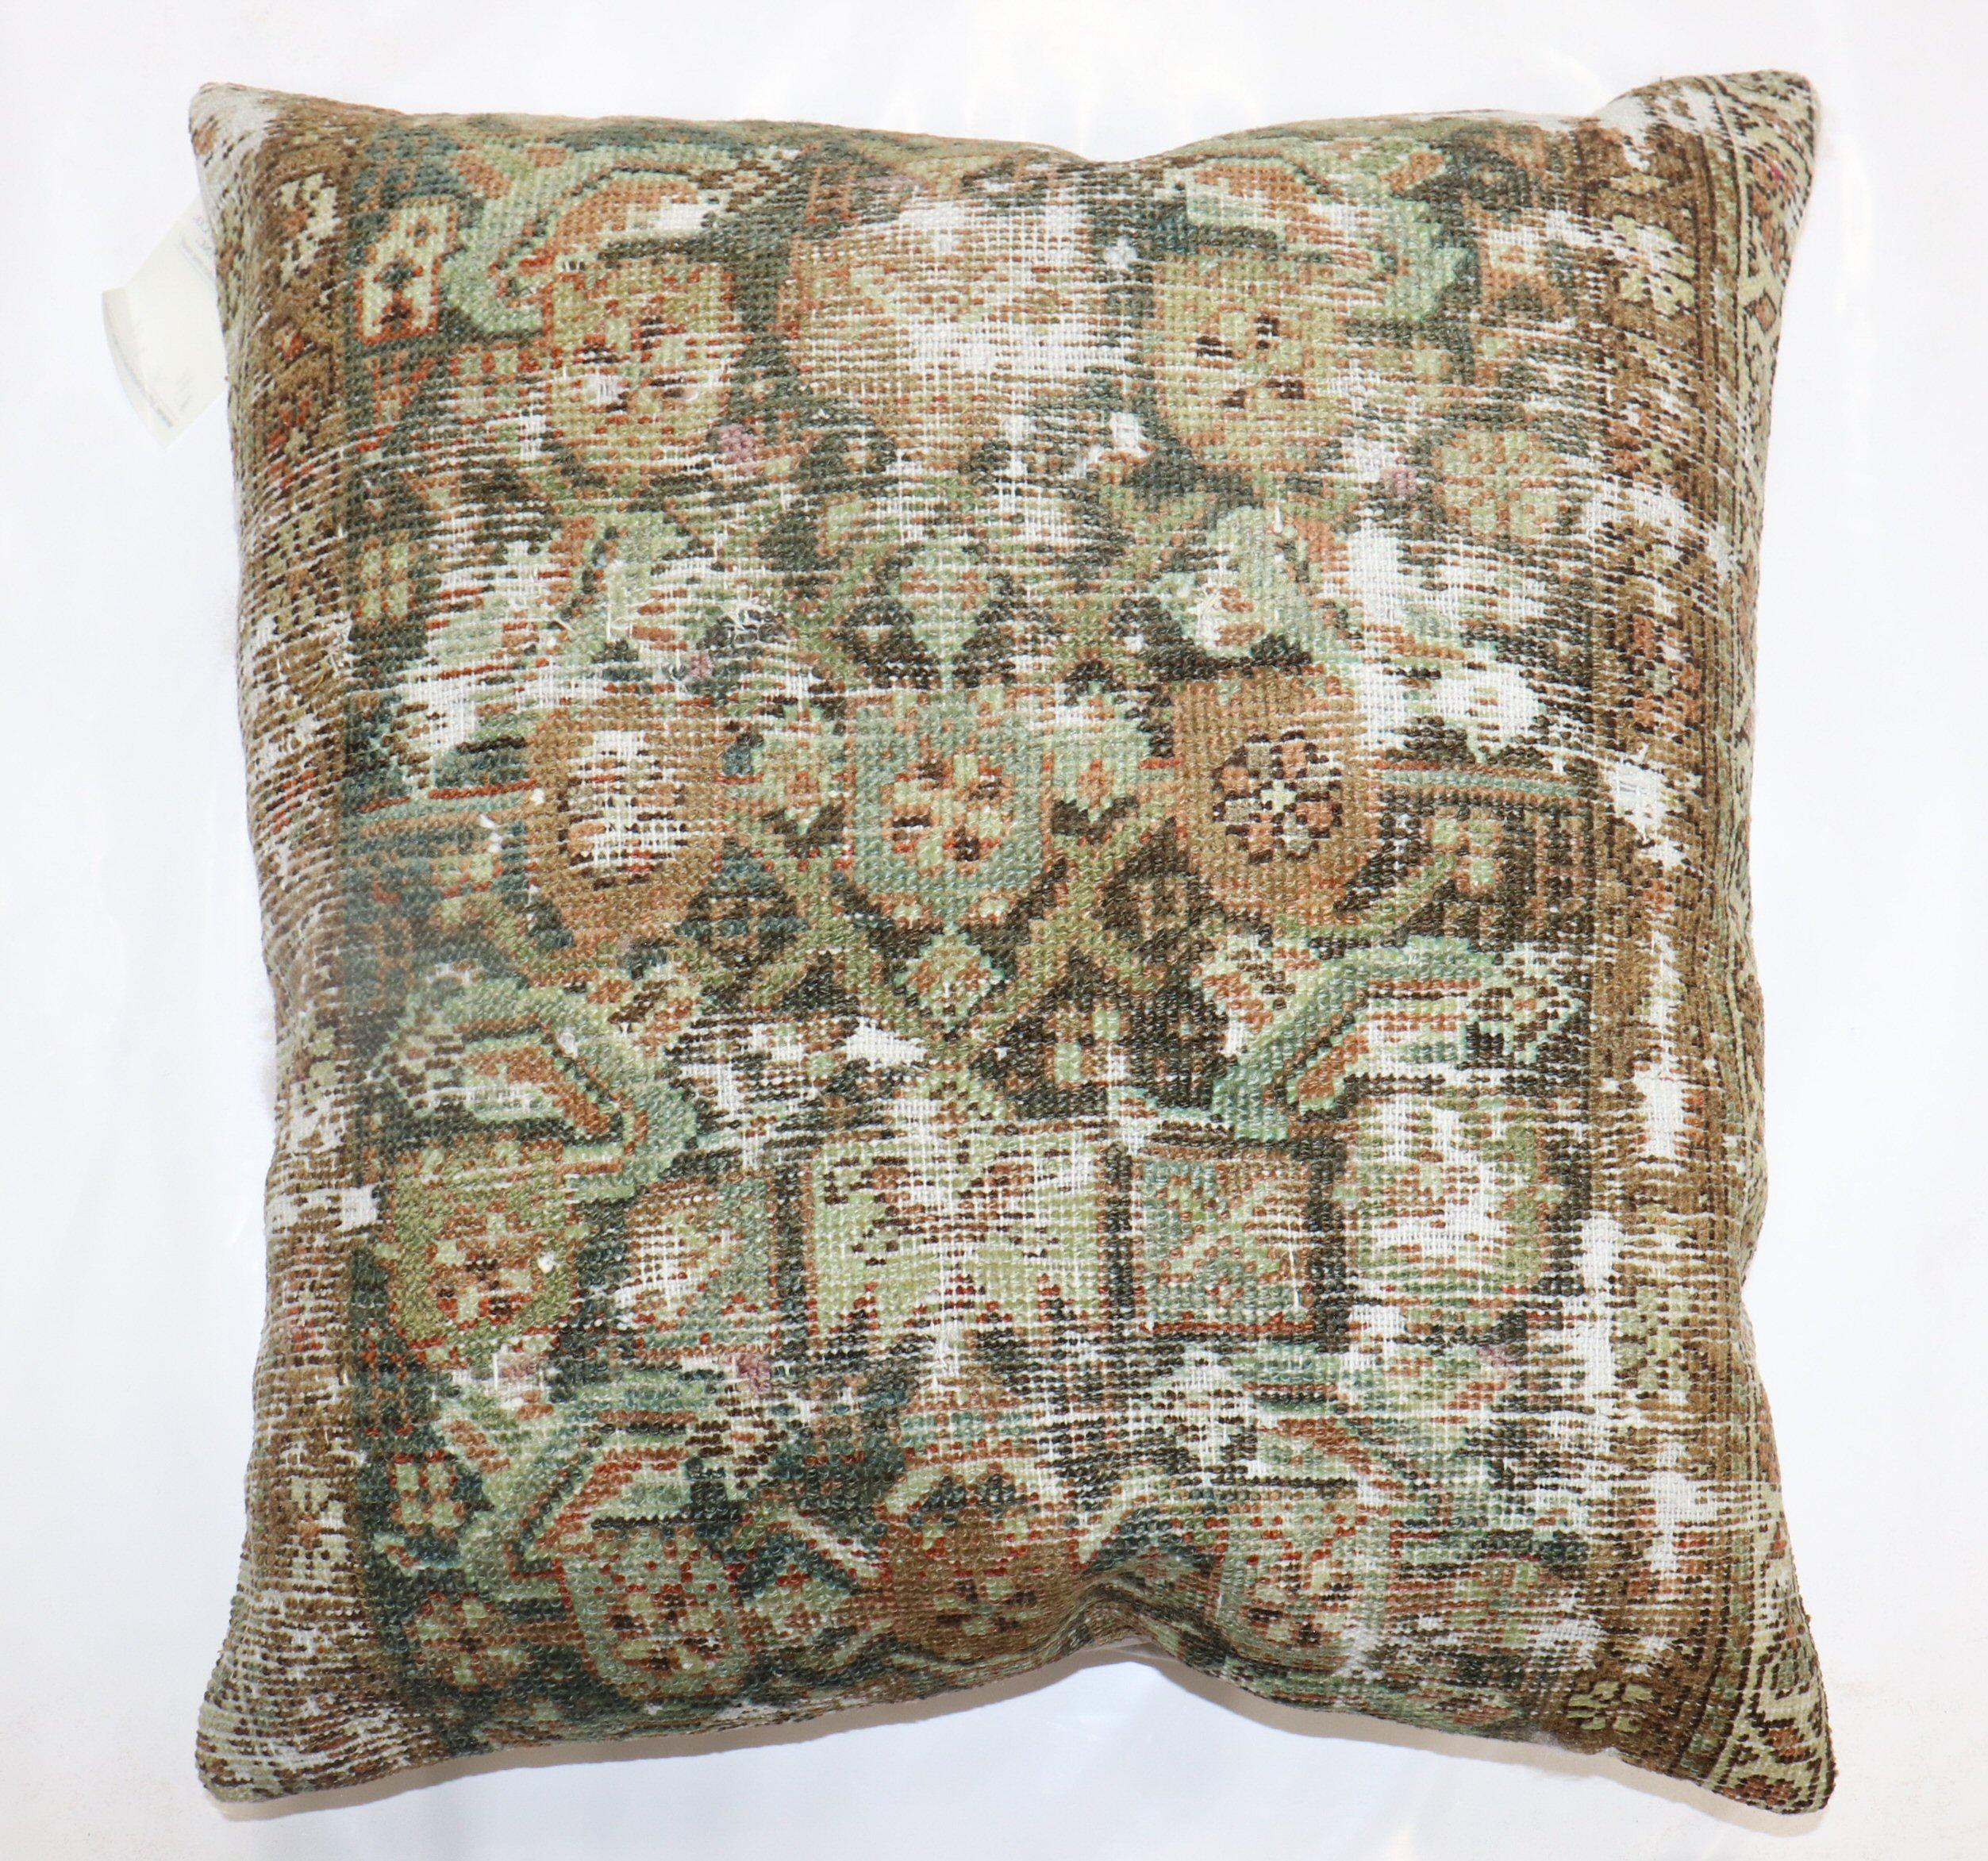 Large Pillow made from a worn antique persian rug.

23'' x 23''